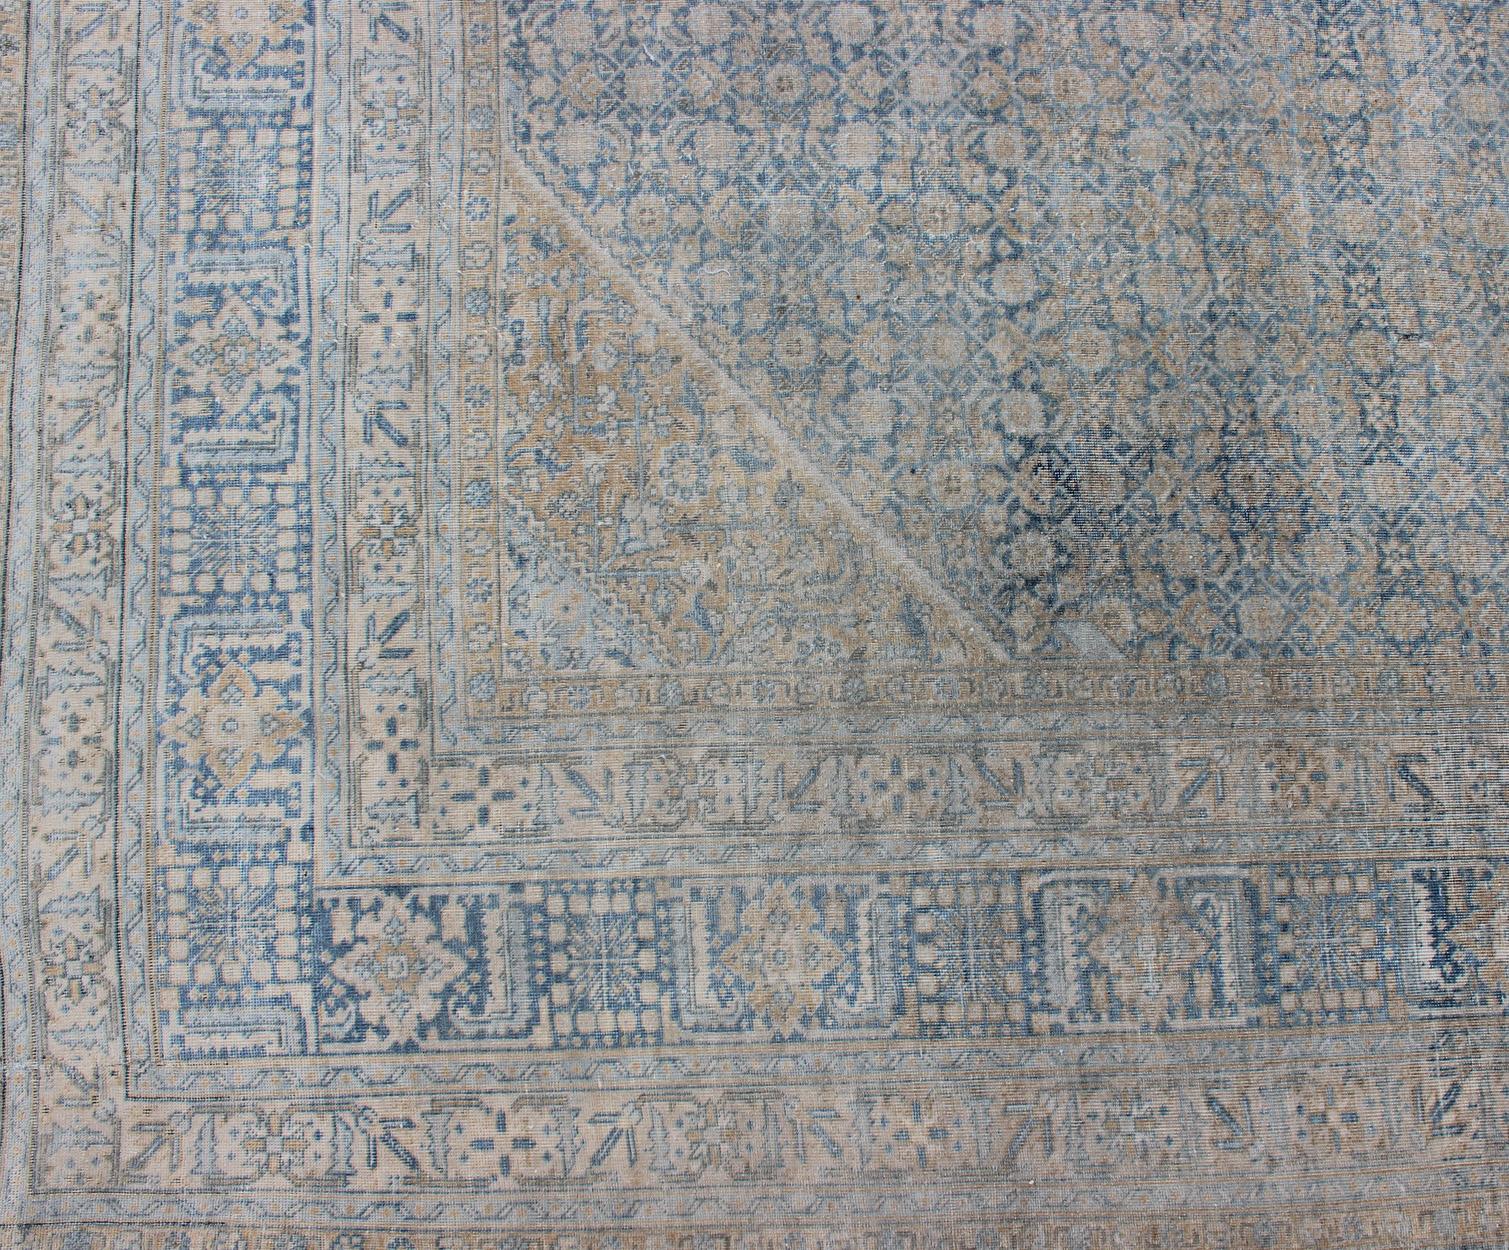 Large Antique Persian Tabriz Rug in All-Over Herati in Shades of Blue and Tan  For Sale 4